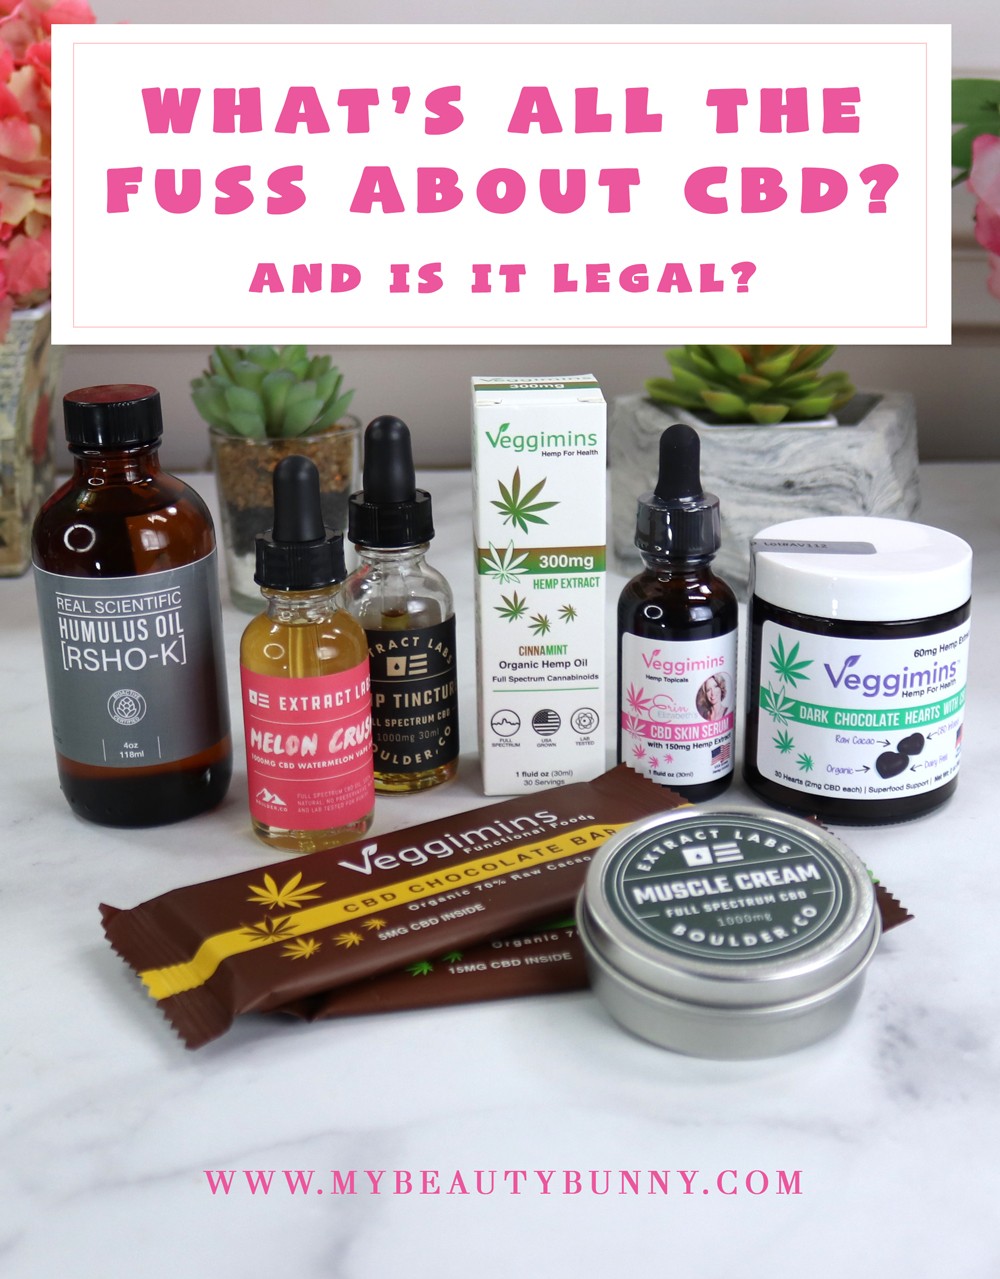 What is CBD used for and is it legal?